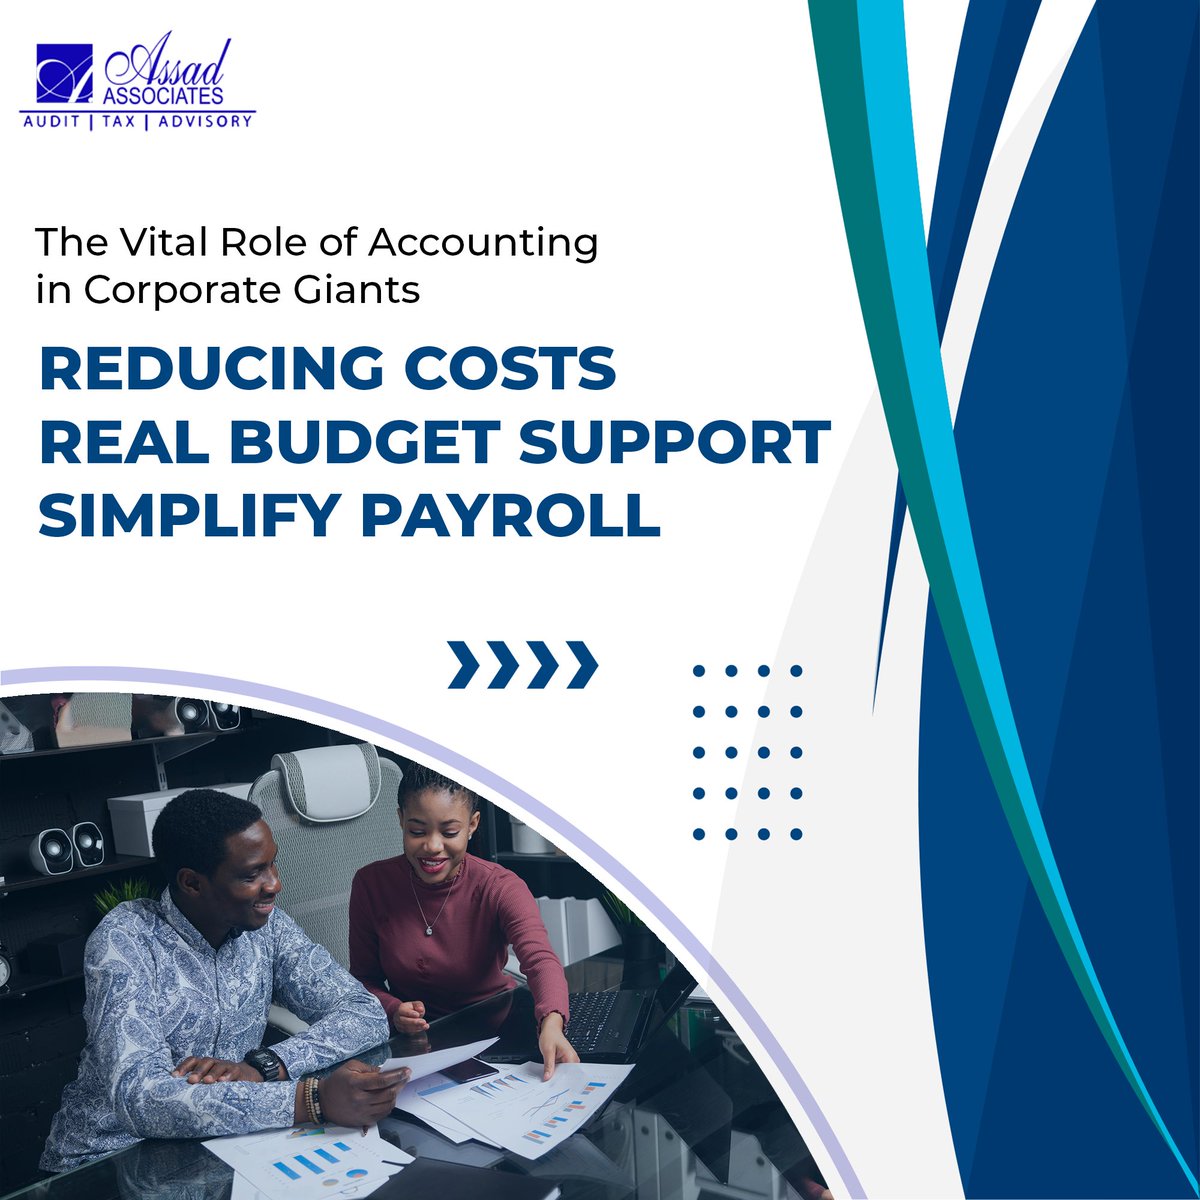 Assad Associates: Your partner in success for AUDIT, TAX, and ADVISORY services. Discover the vital role of accounting in corporate giants – reducing costs, real budget support, and simplifying payroll.

#AssadAssociates #FinancialExcellence